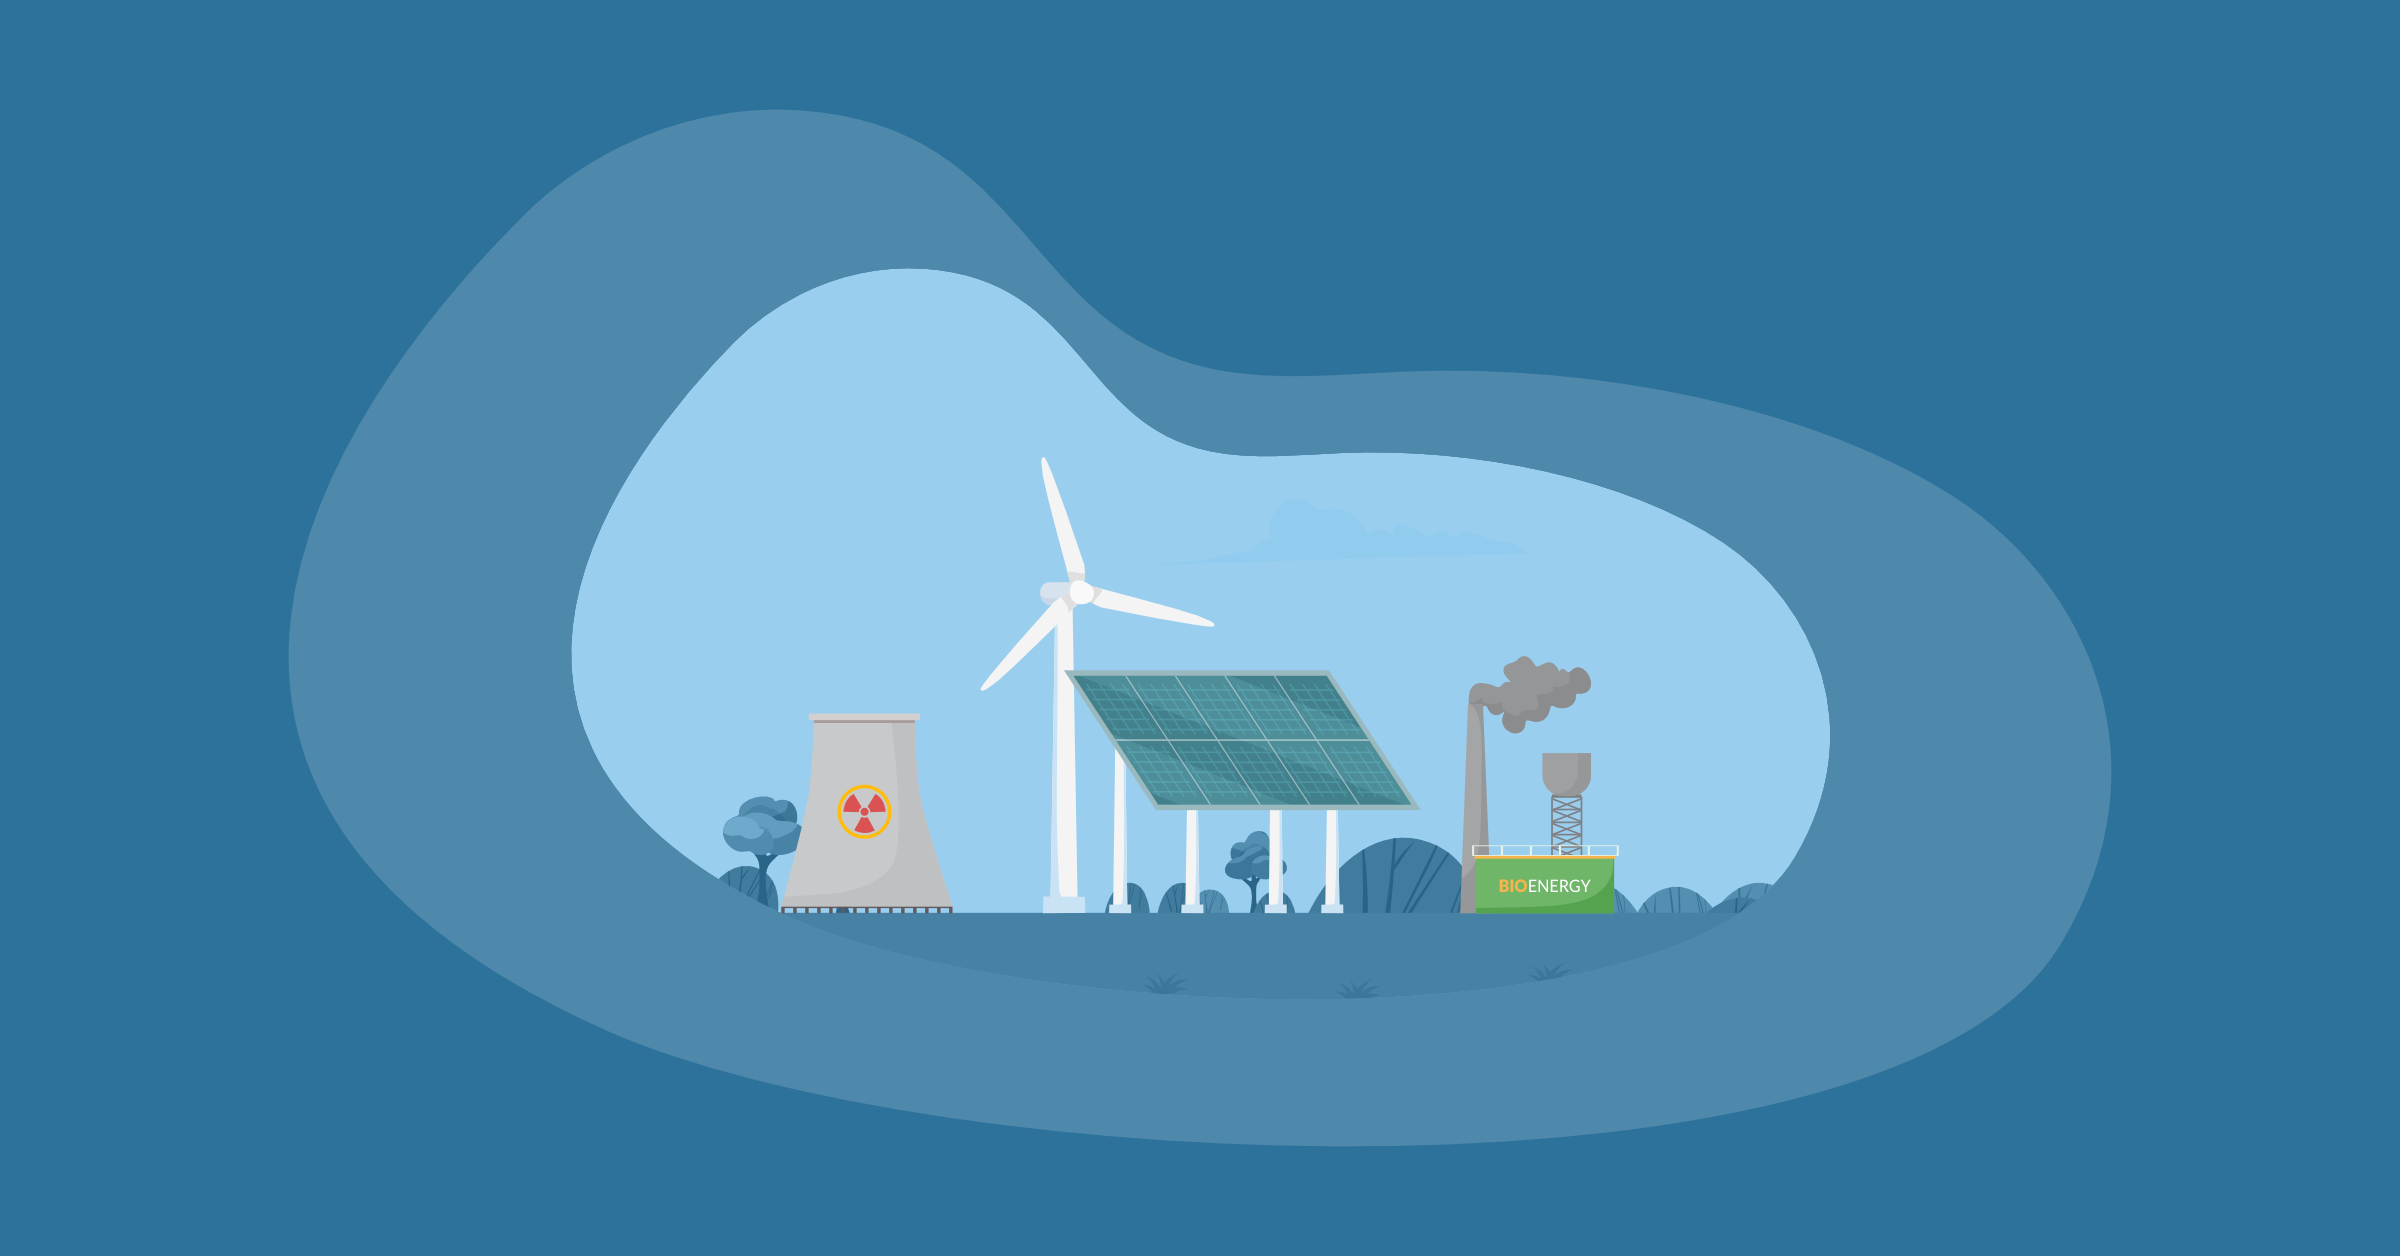 Illustration of clean and renewable energies